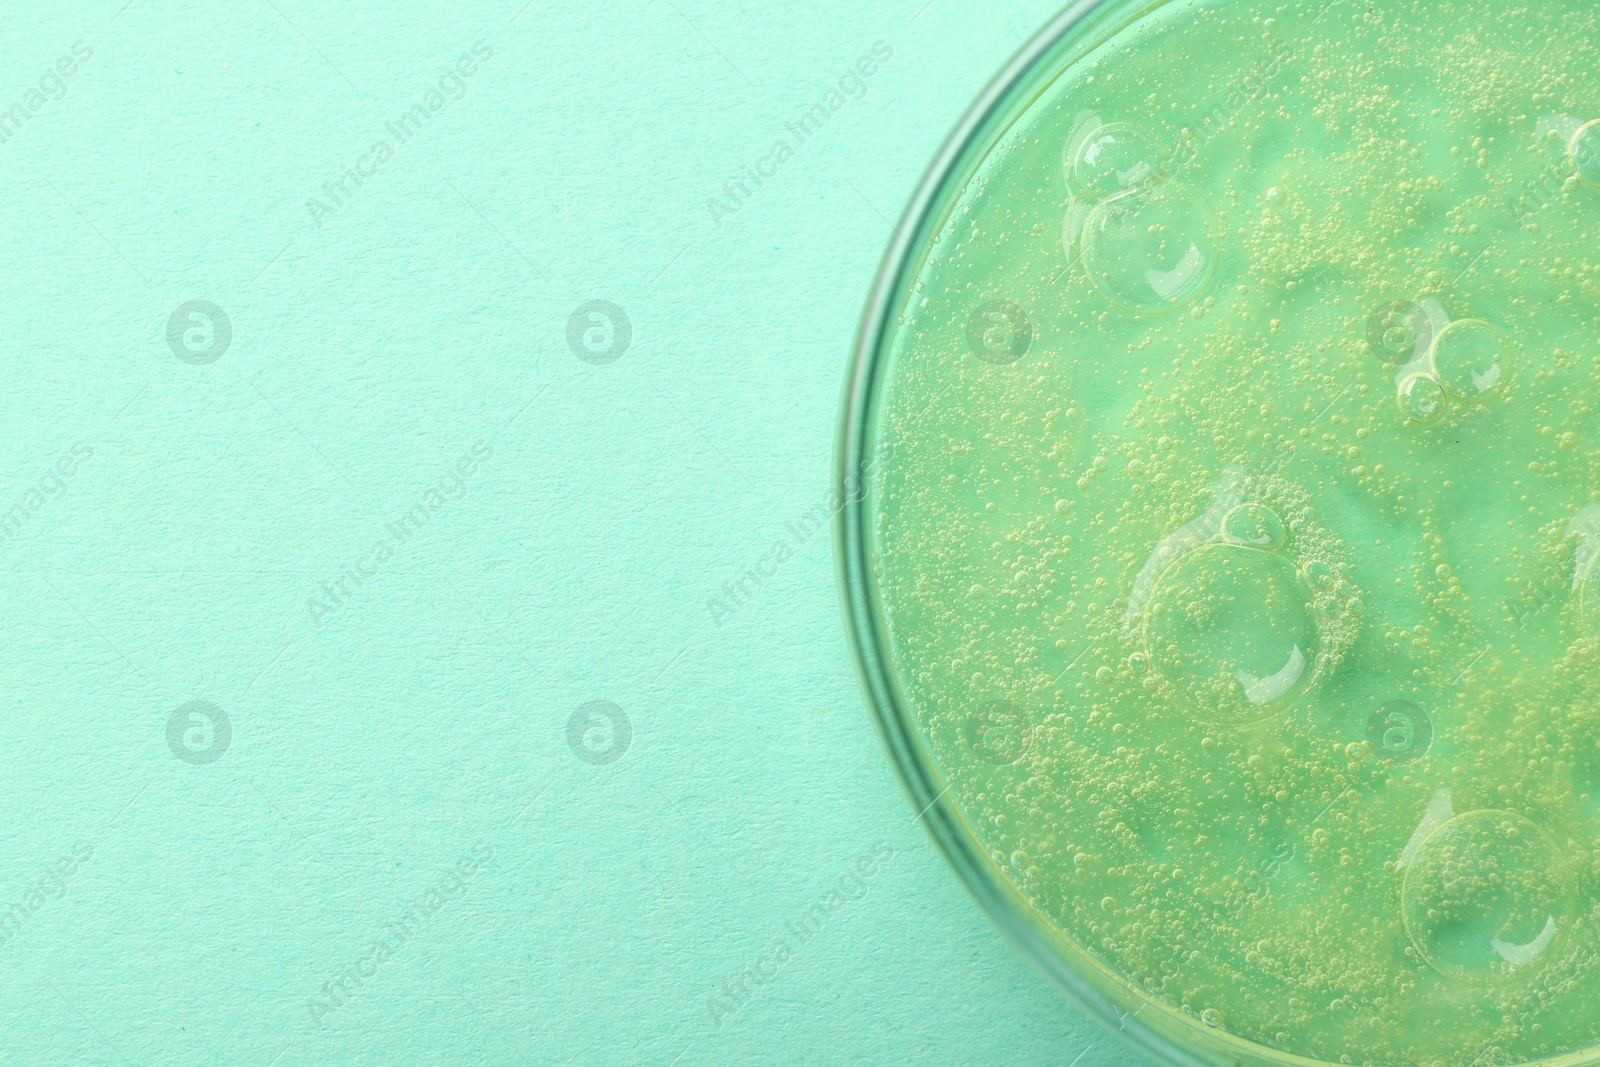 Photo of Petri dish with color liquid sample on light blue background, top view. Space for text